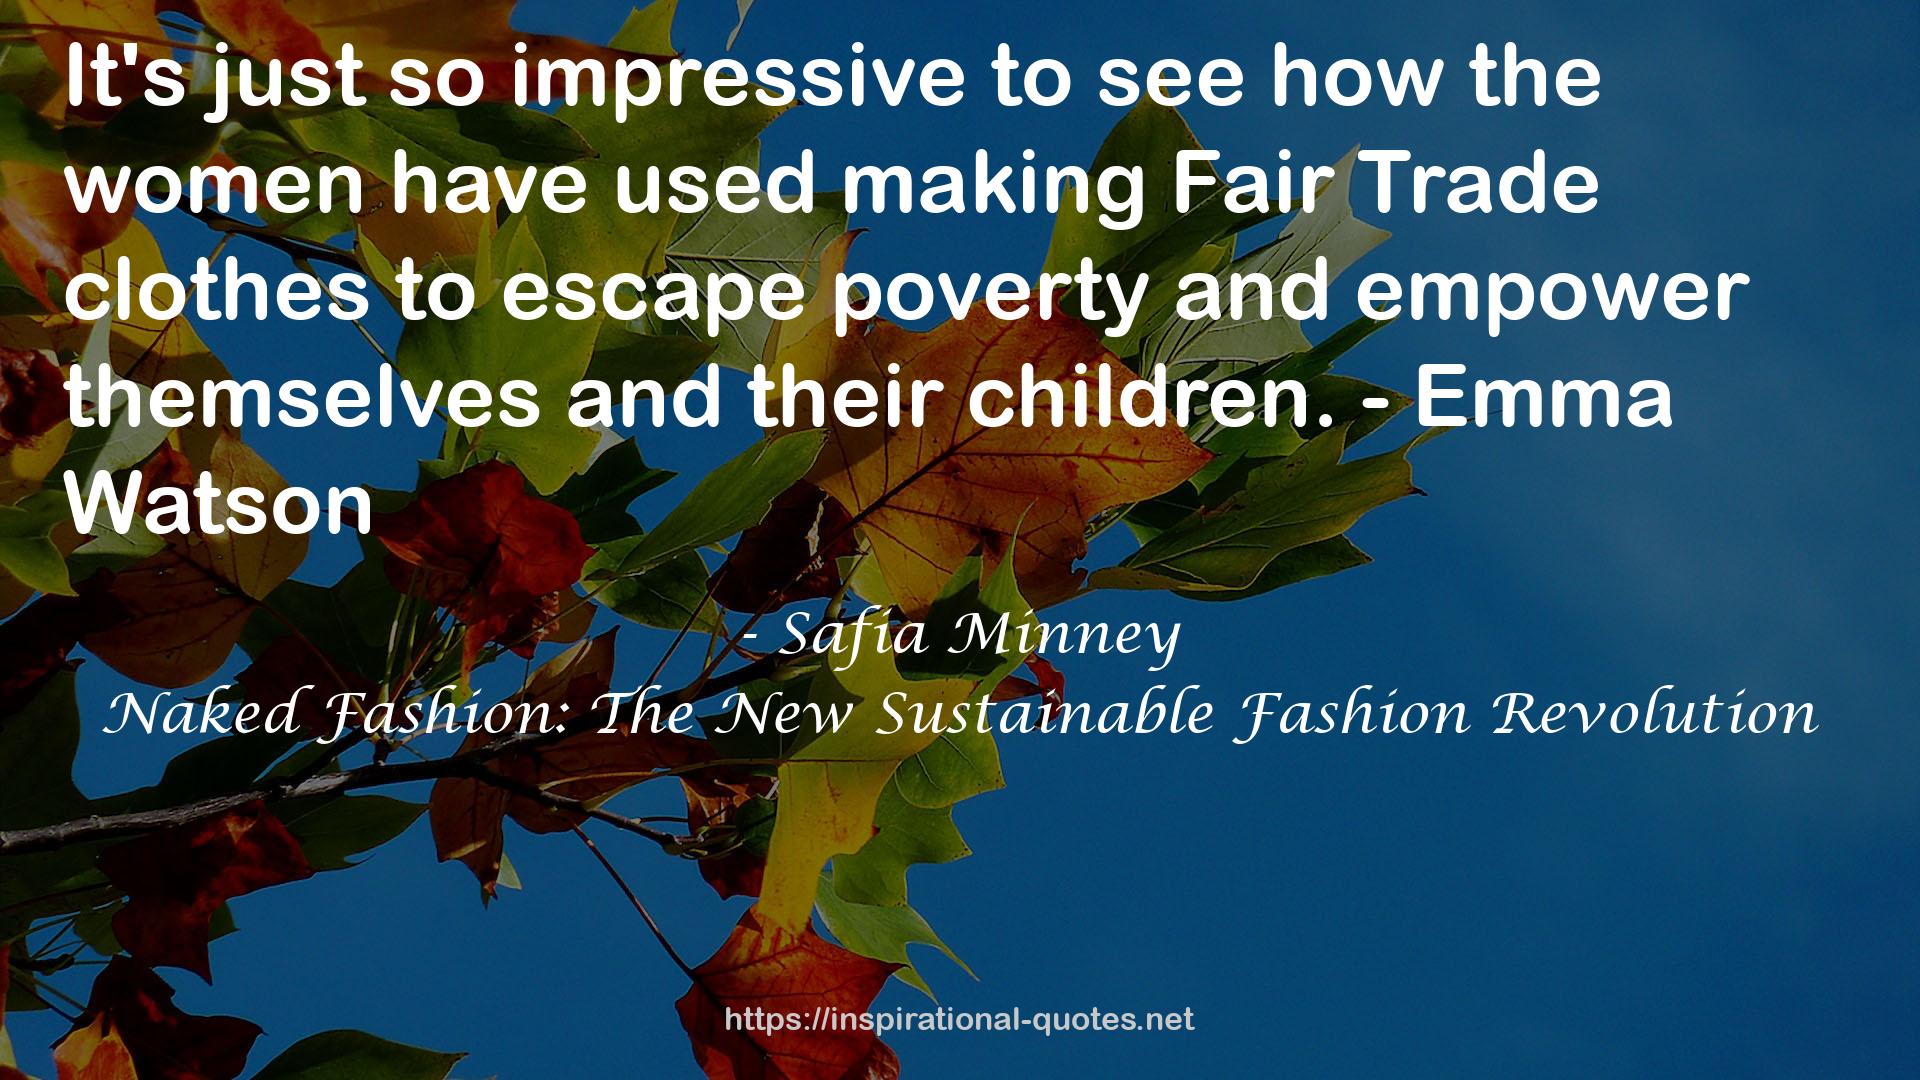 Naked Fashion: The New Sustainable Fashion Revolution QUOTES